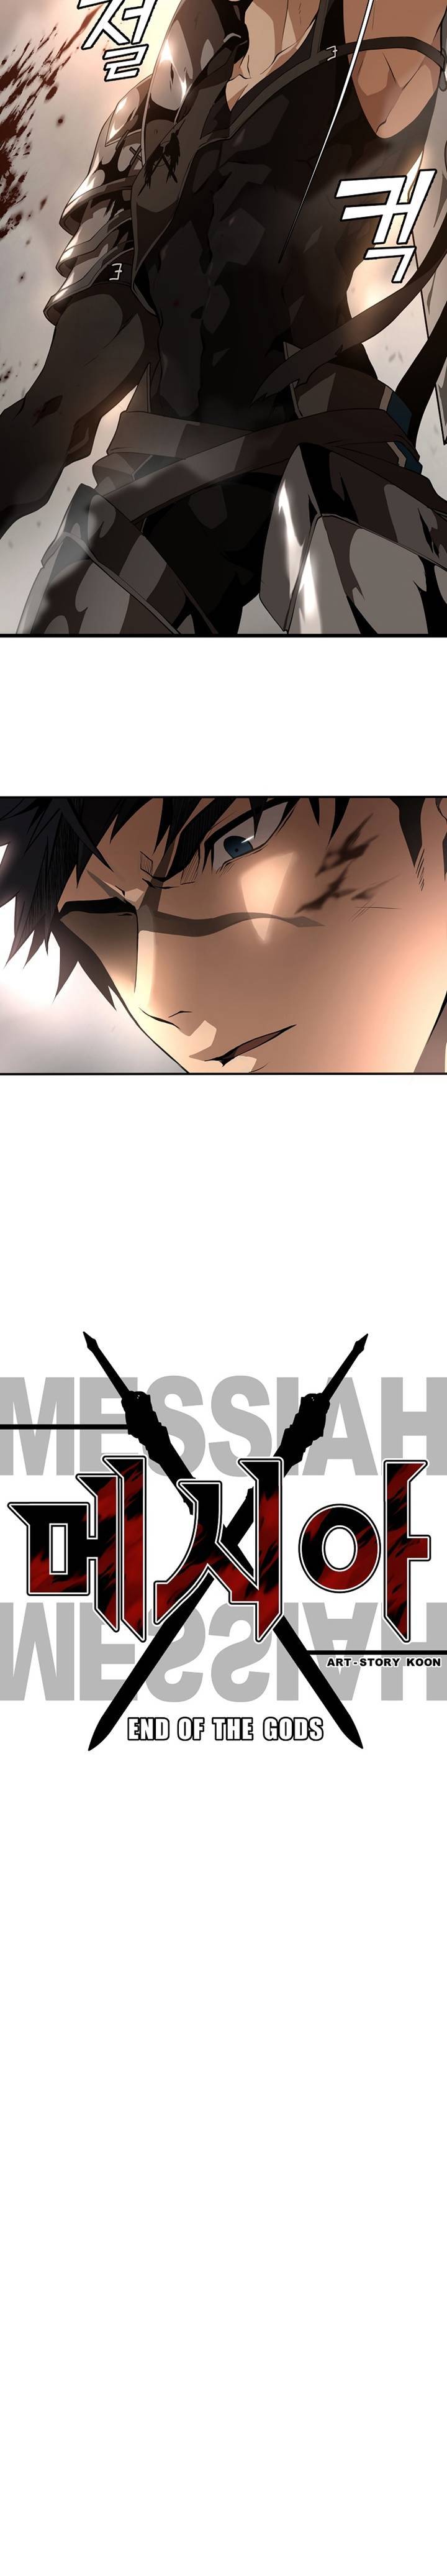 Messiah: End of the Gods Chapter 01